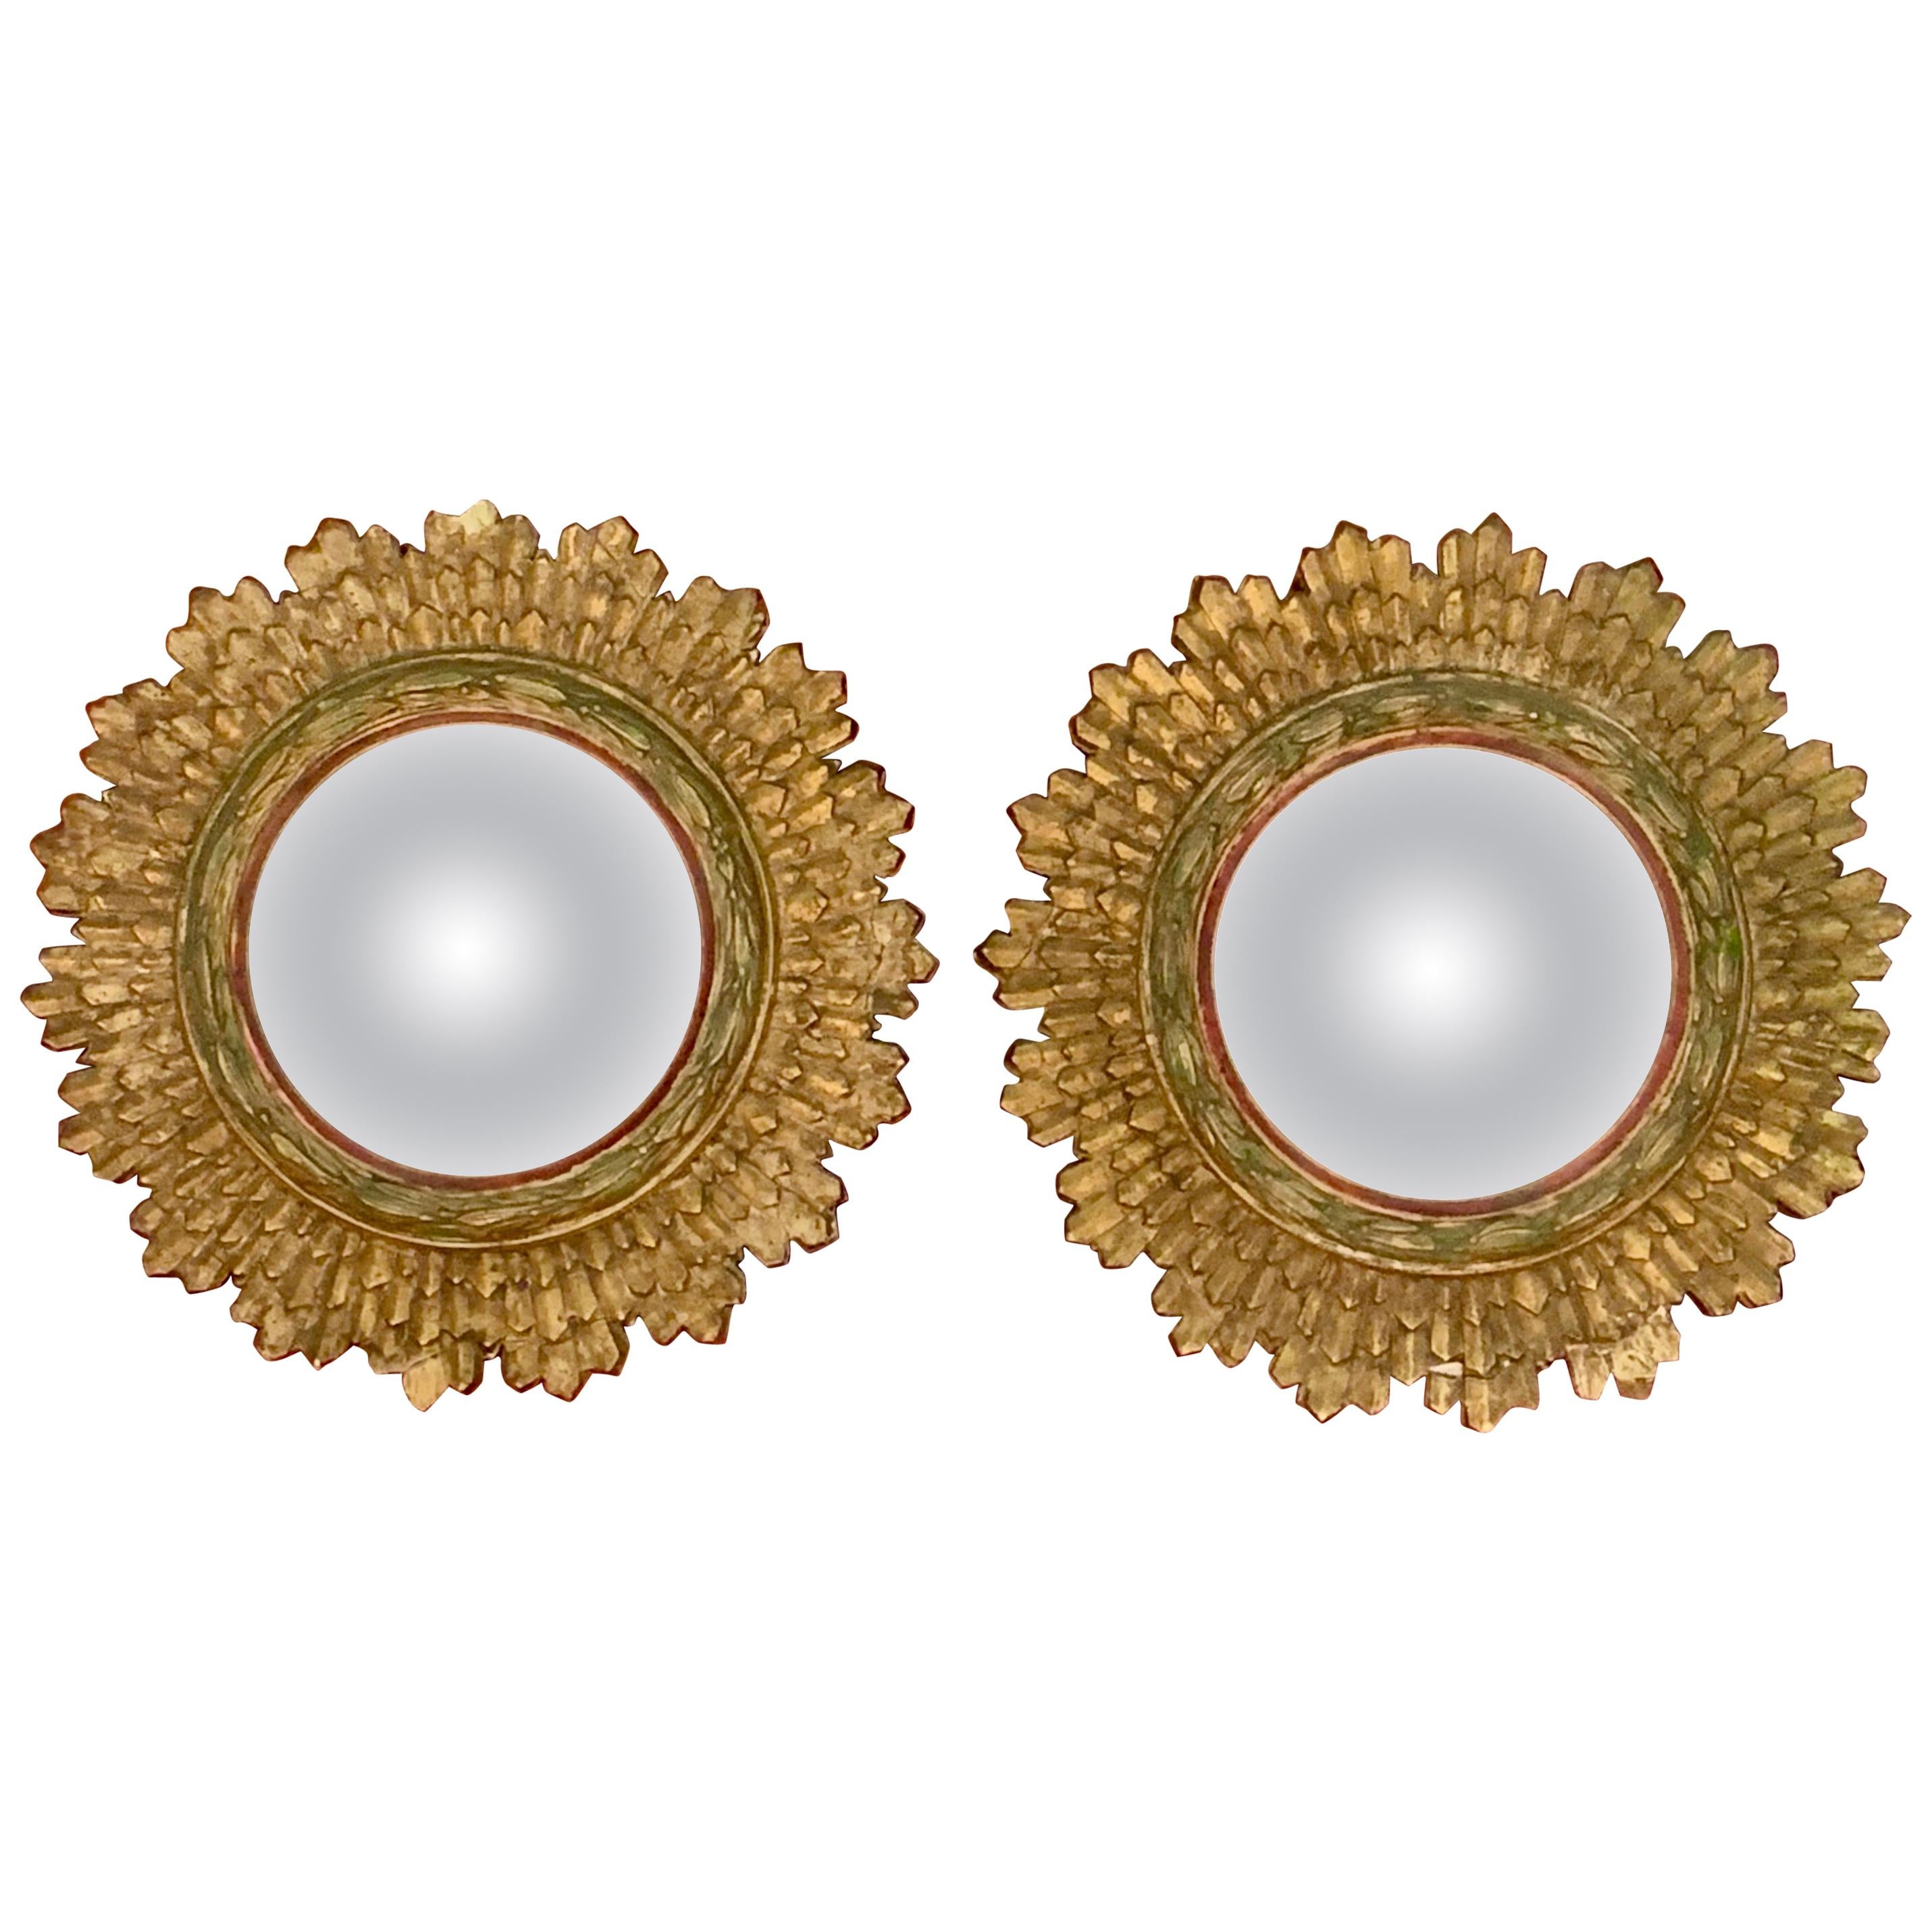 Hollywood Regency French Giltwood and Gesso Sunburst Convex Wall Mirrors, a pair